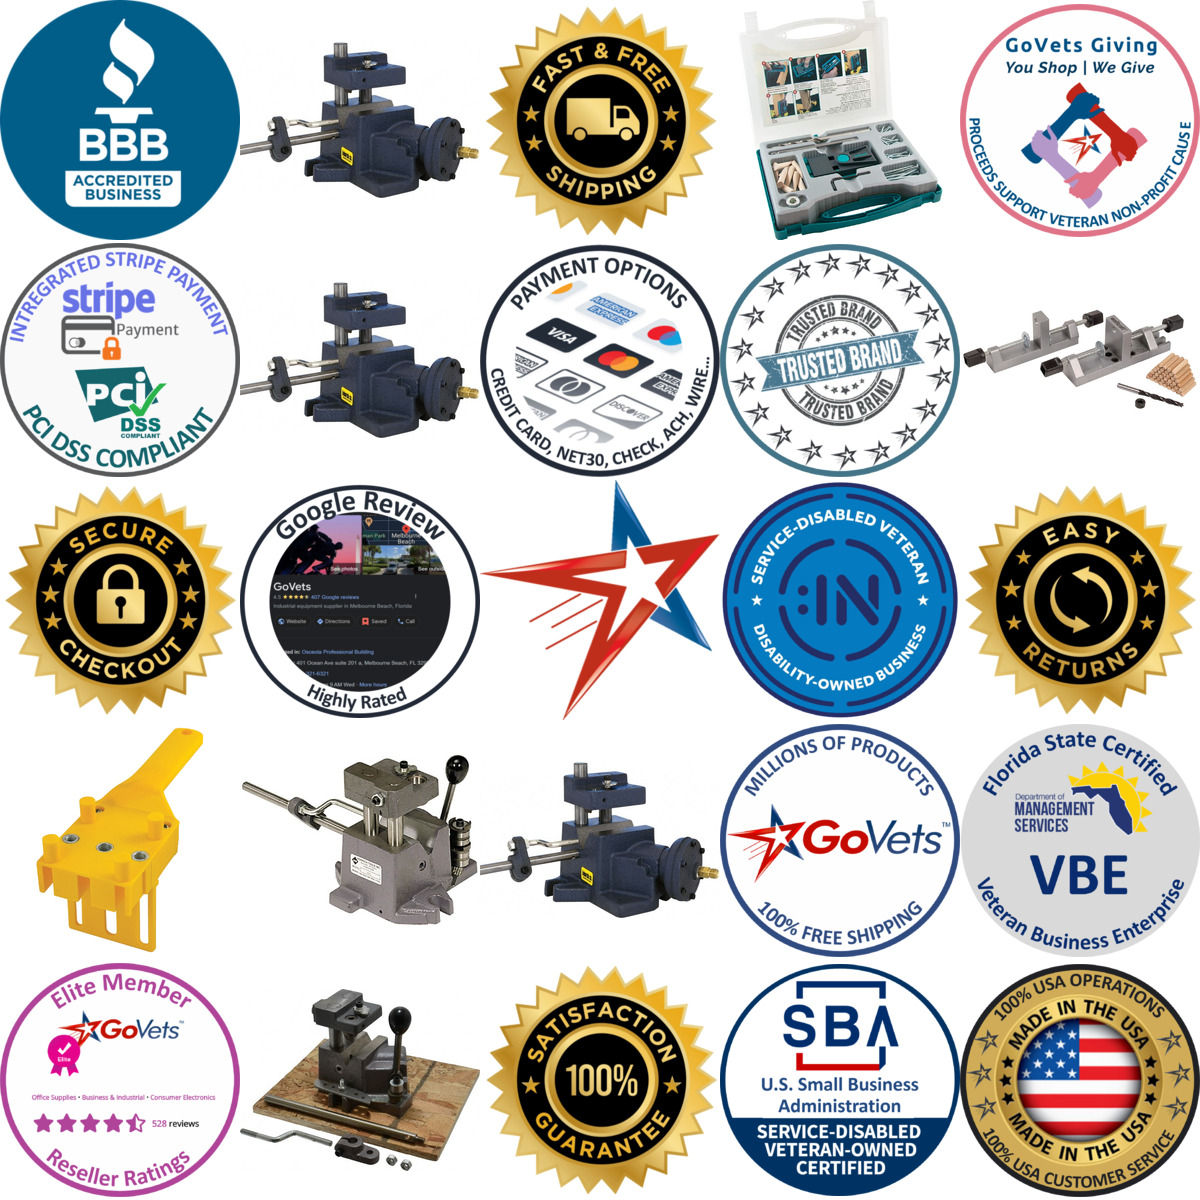 A selection of Cross Hole Drill Jigs products on GoVets